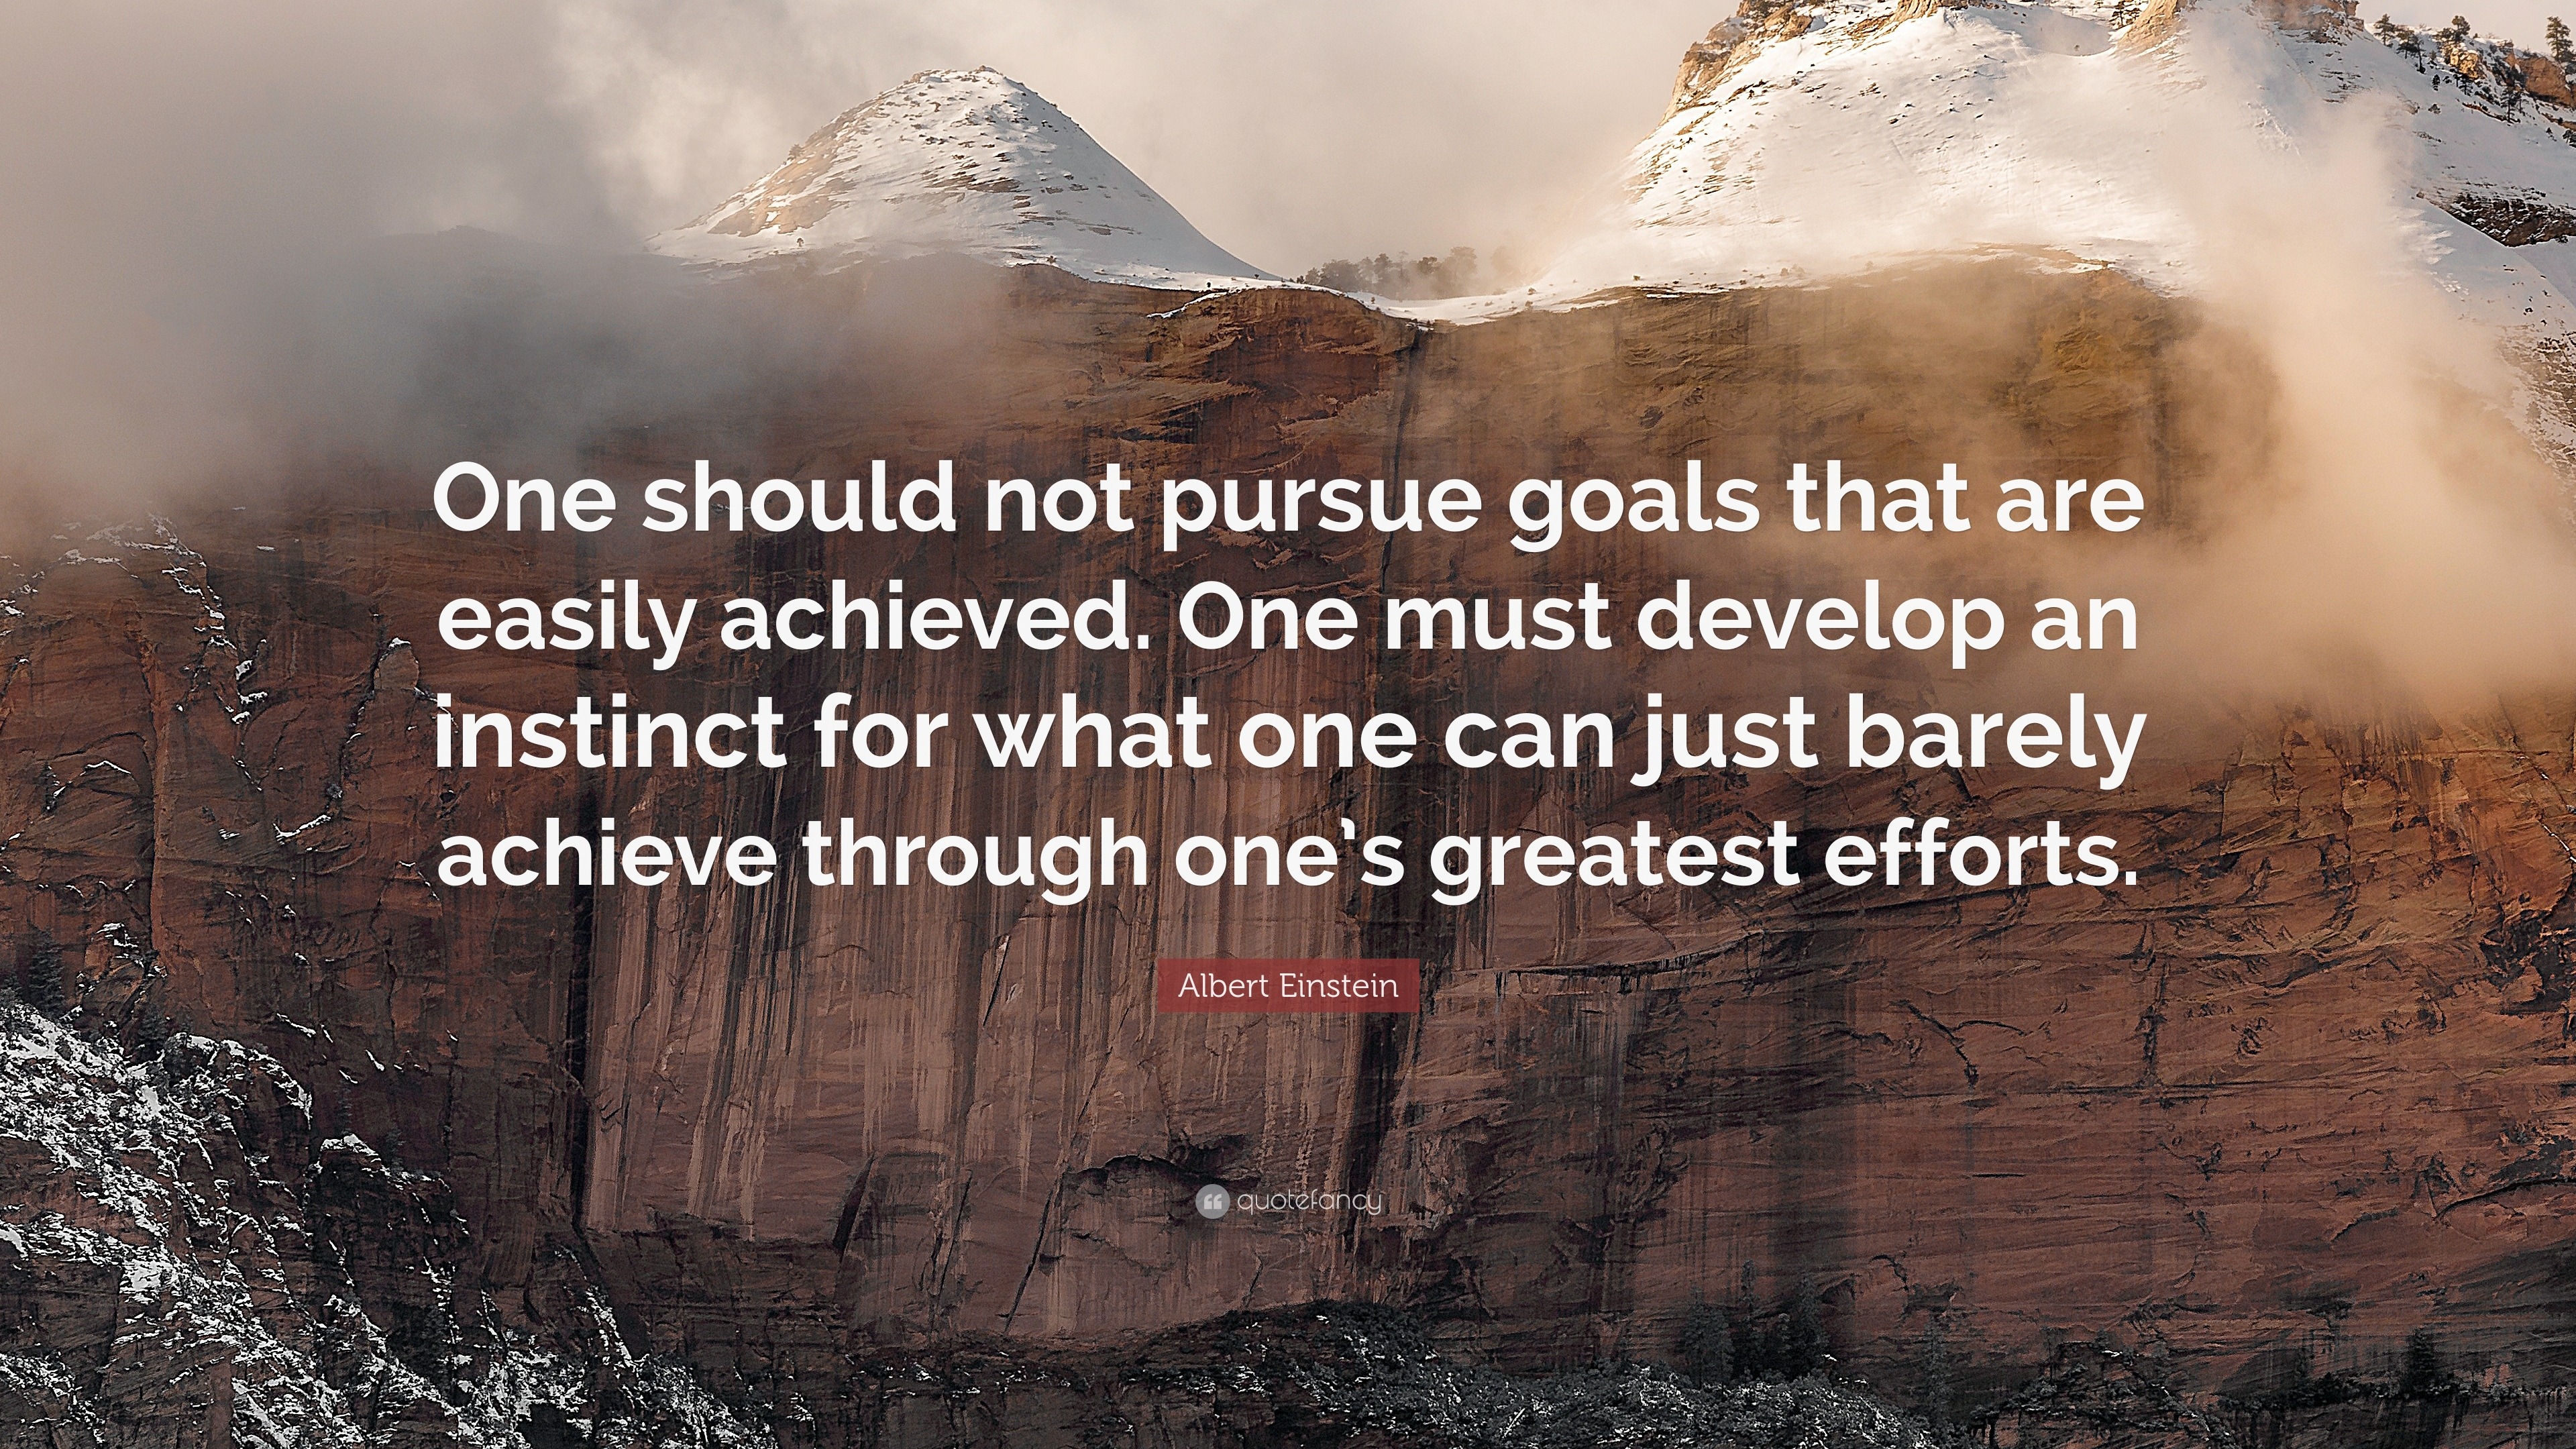 Effort Quotes “ e should not pursue goals that are easily achieved e must